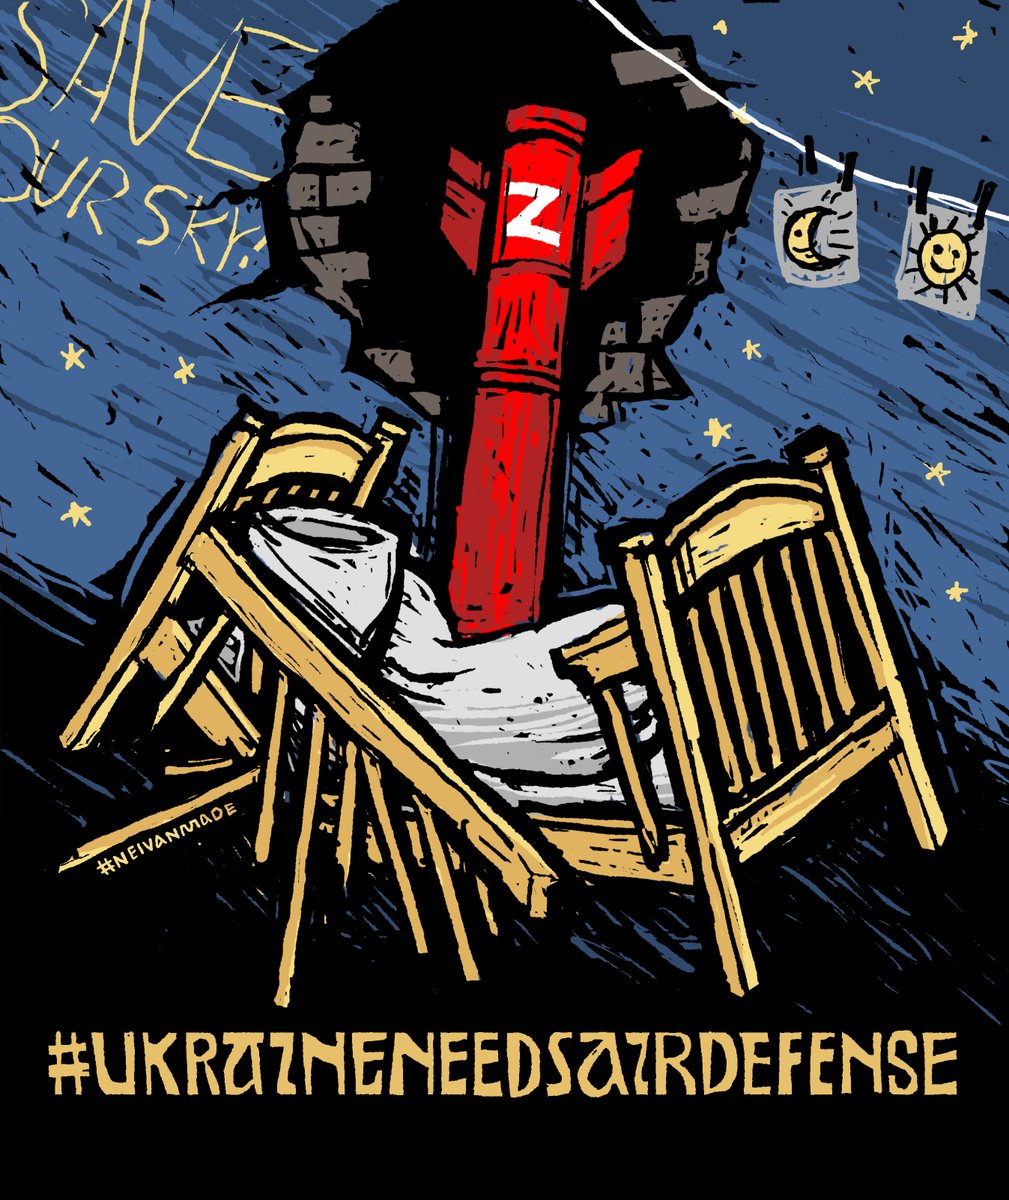 We are Ukrainians. We fight every day for the right to exist. We are alone against a mighty empire that despises democracy, compromises, freedom of speech, and freedom itself. So we ask for air defence. Protect our sky, save our children! #NEIVANMADE #ukraineneedsairdefense